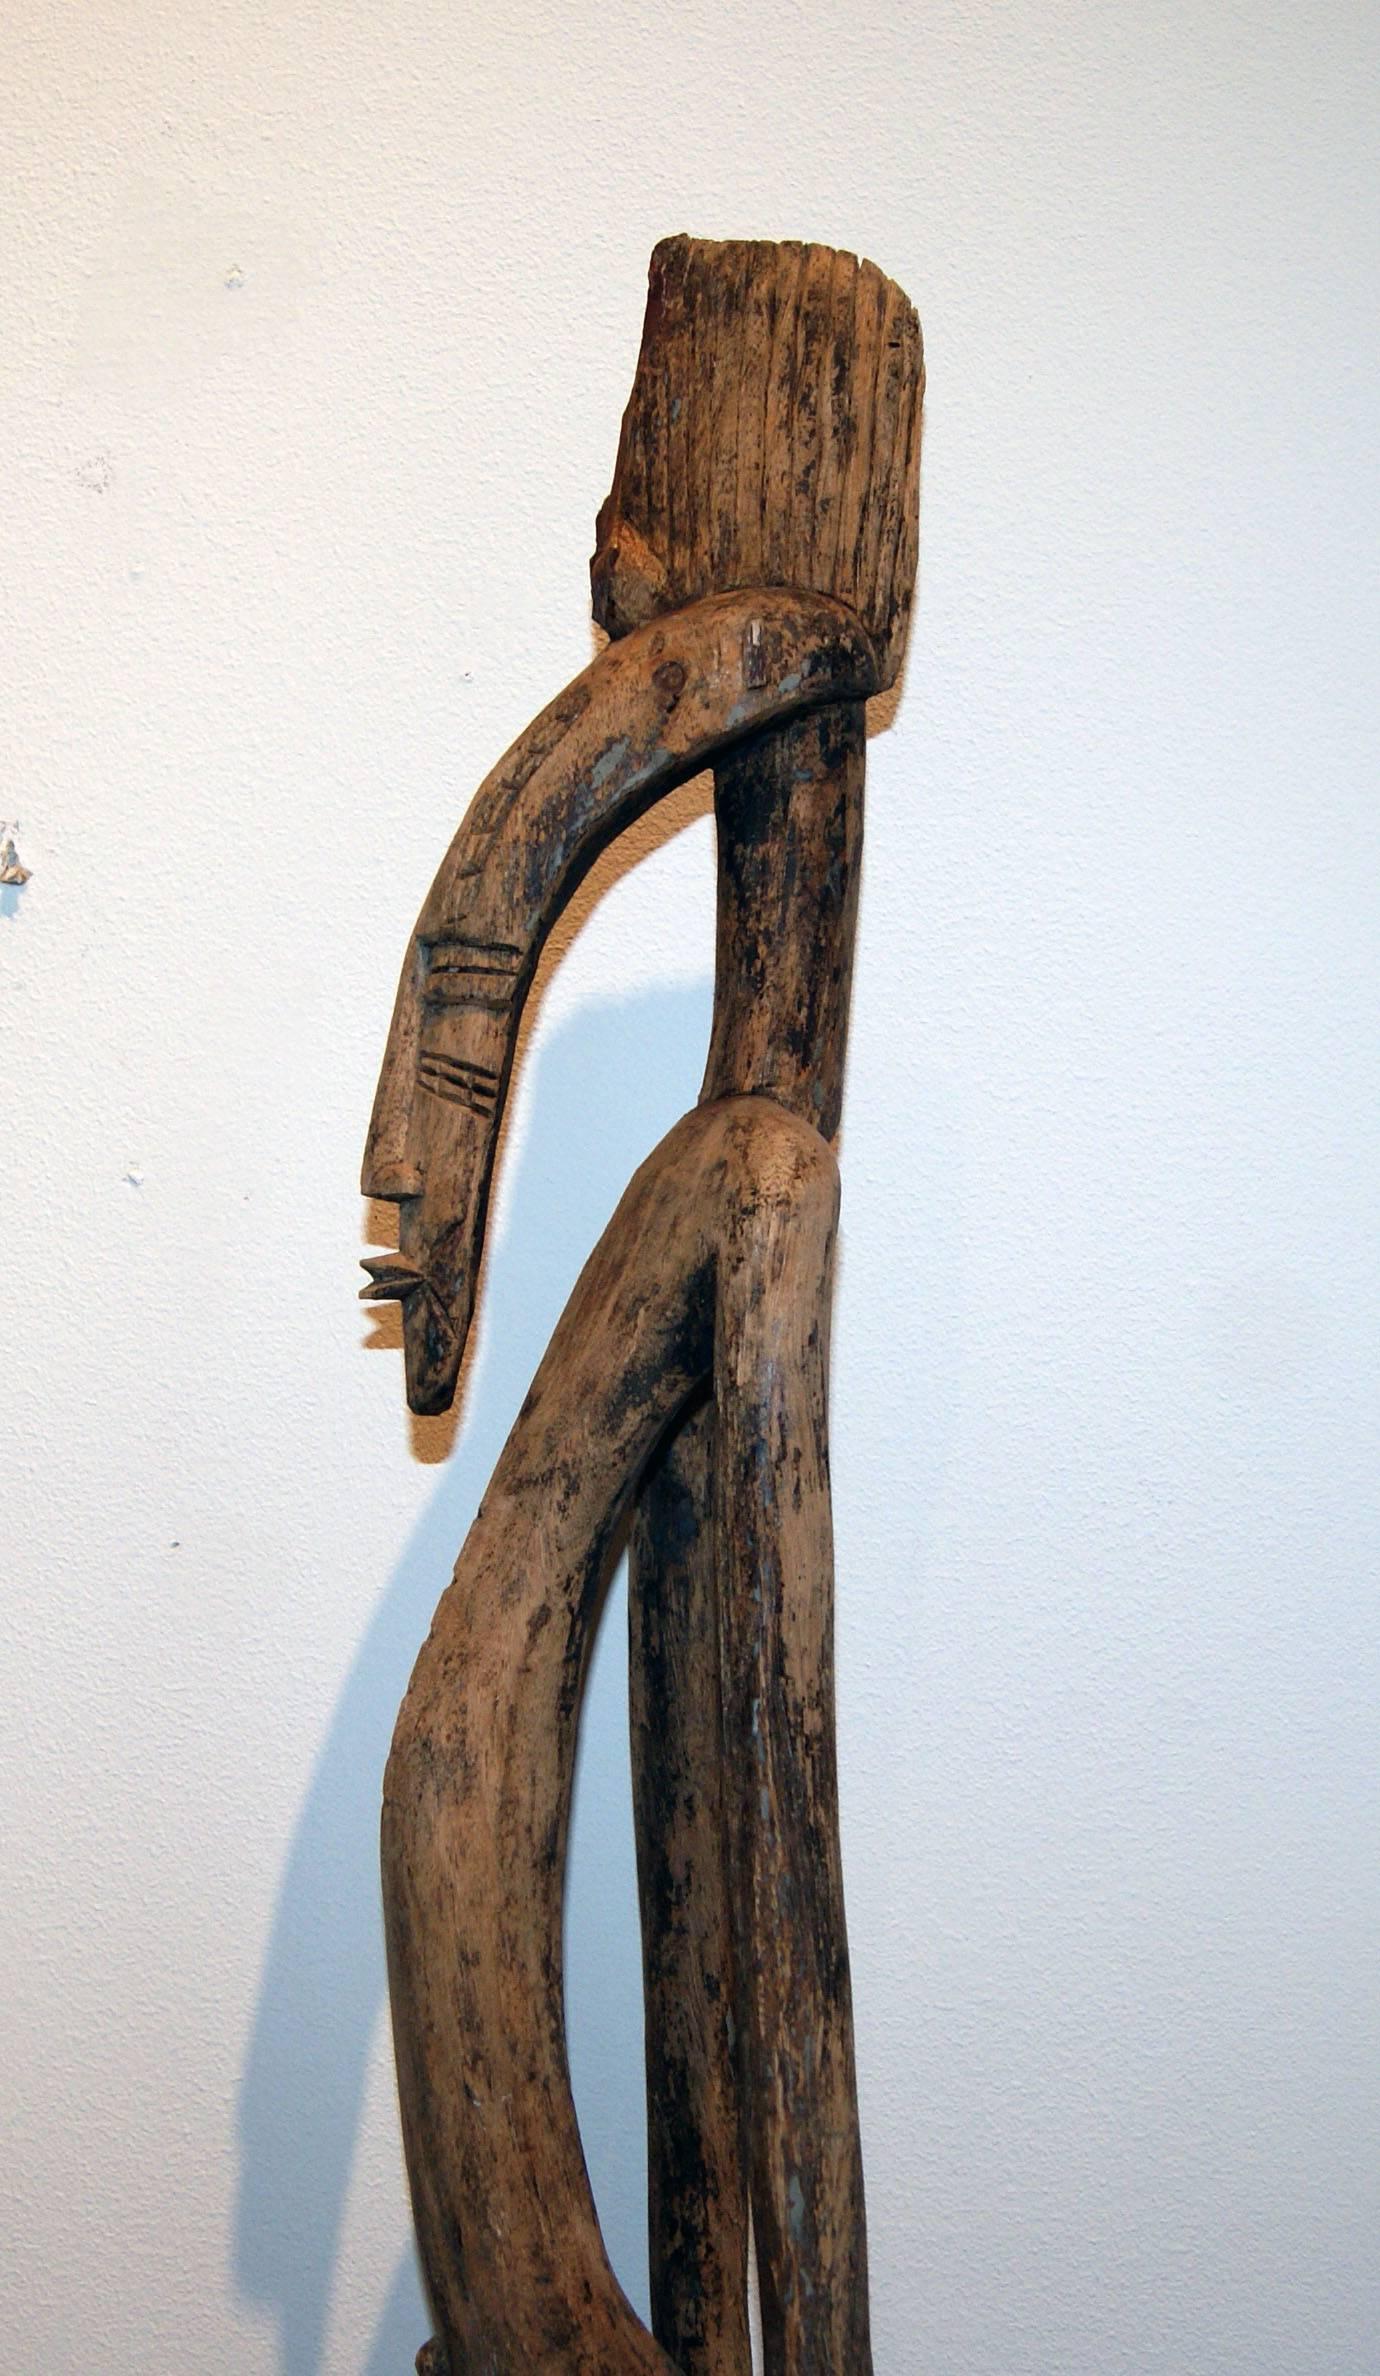 This is a wood carving of a man from the Senufo people of the Ivory Coast in Africa.